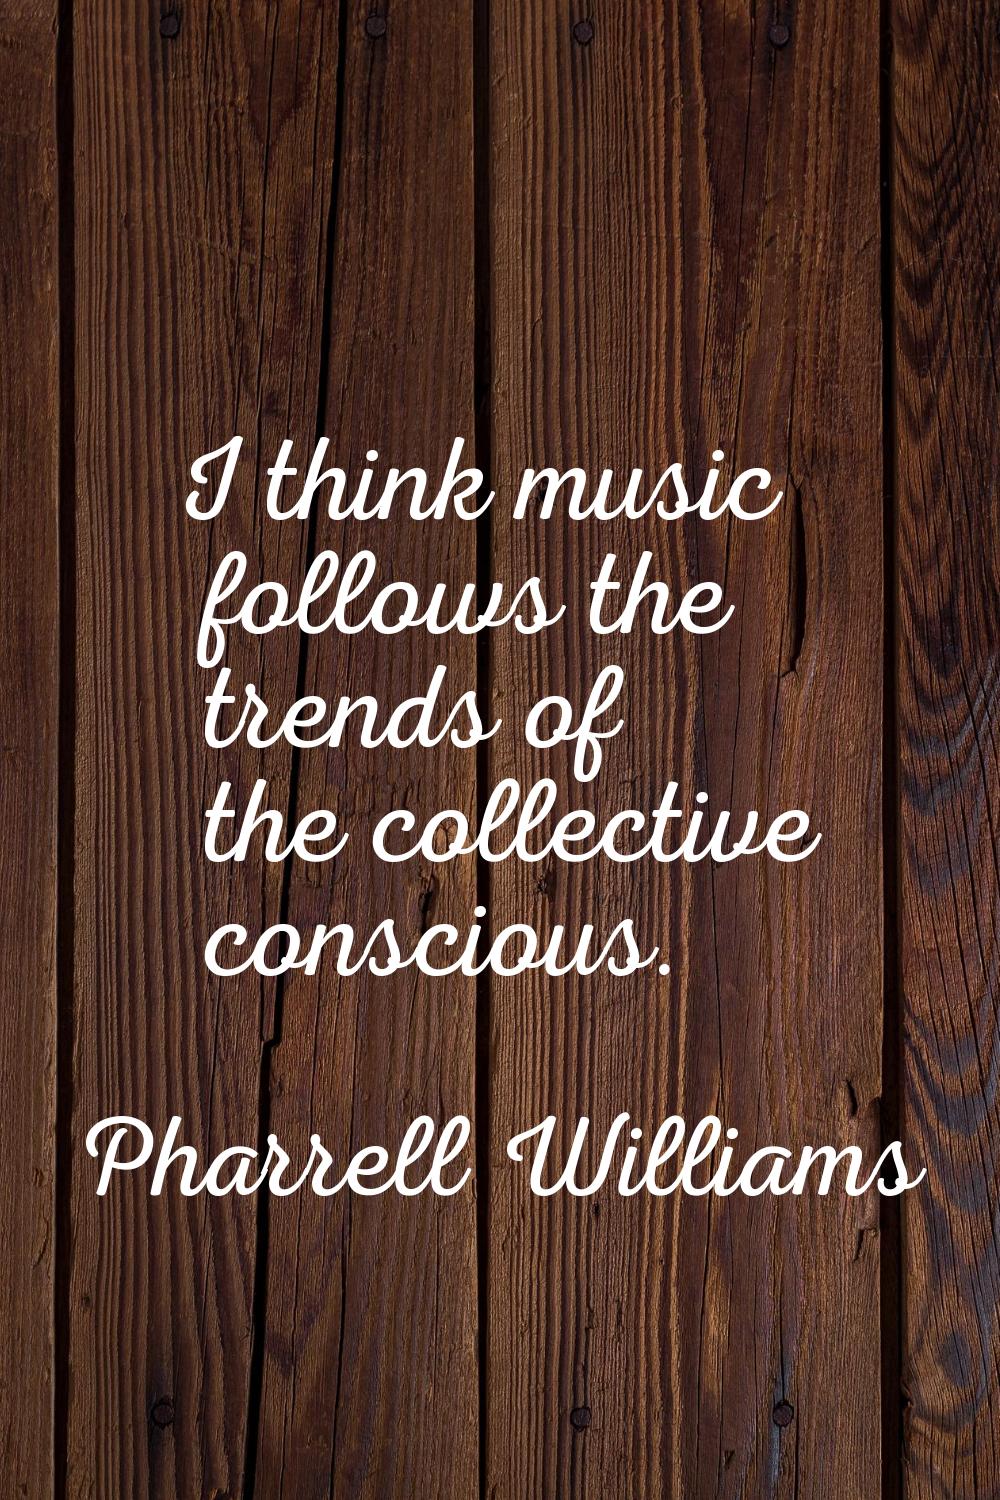 I think music follows the trends of the collective conscious.